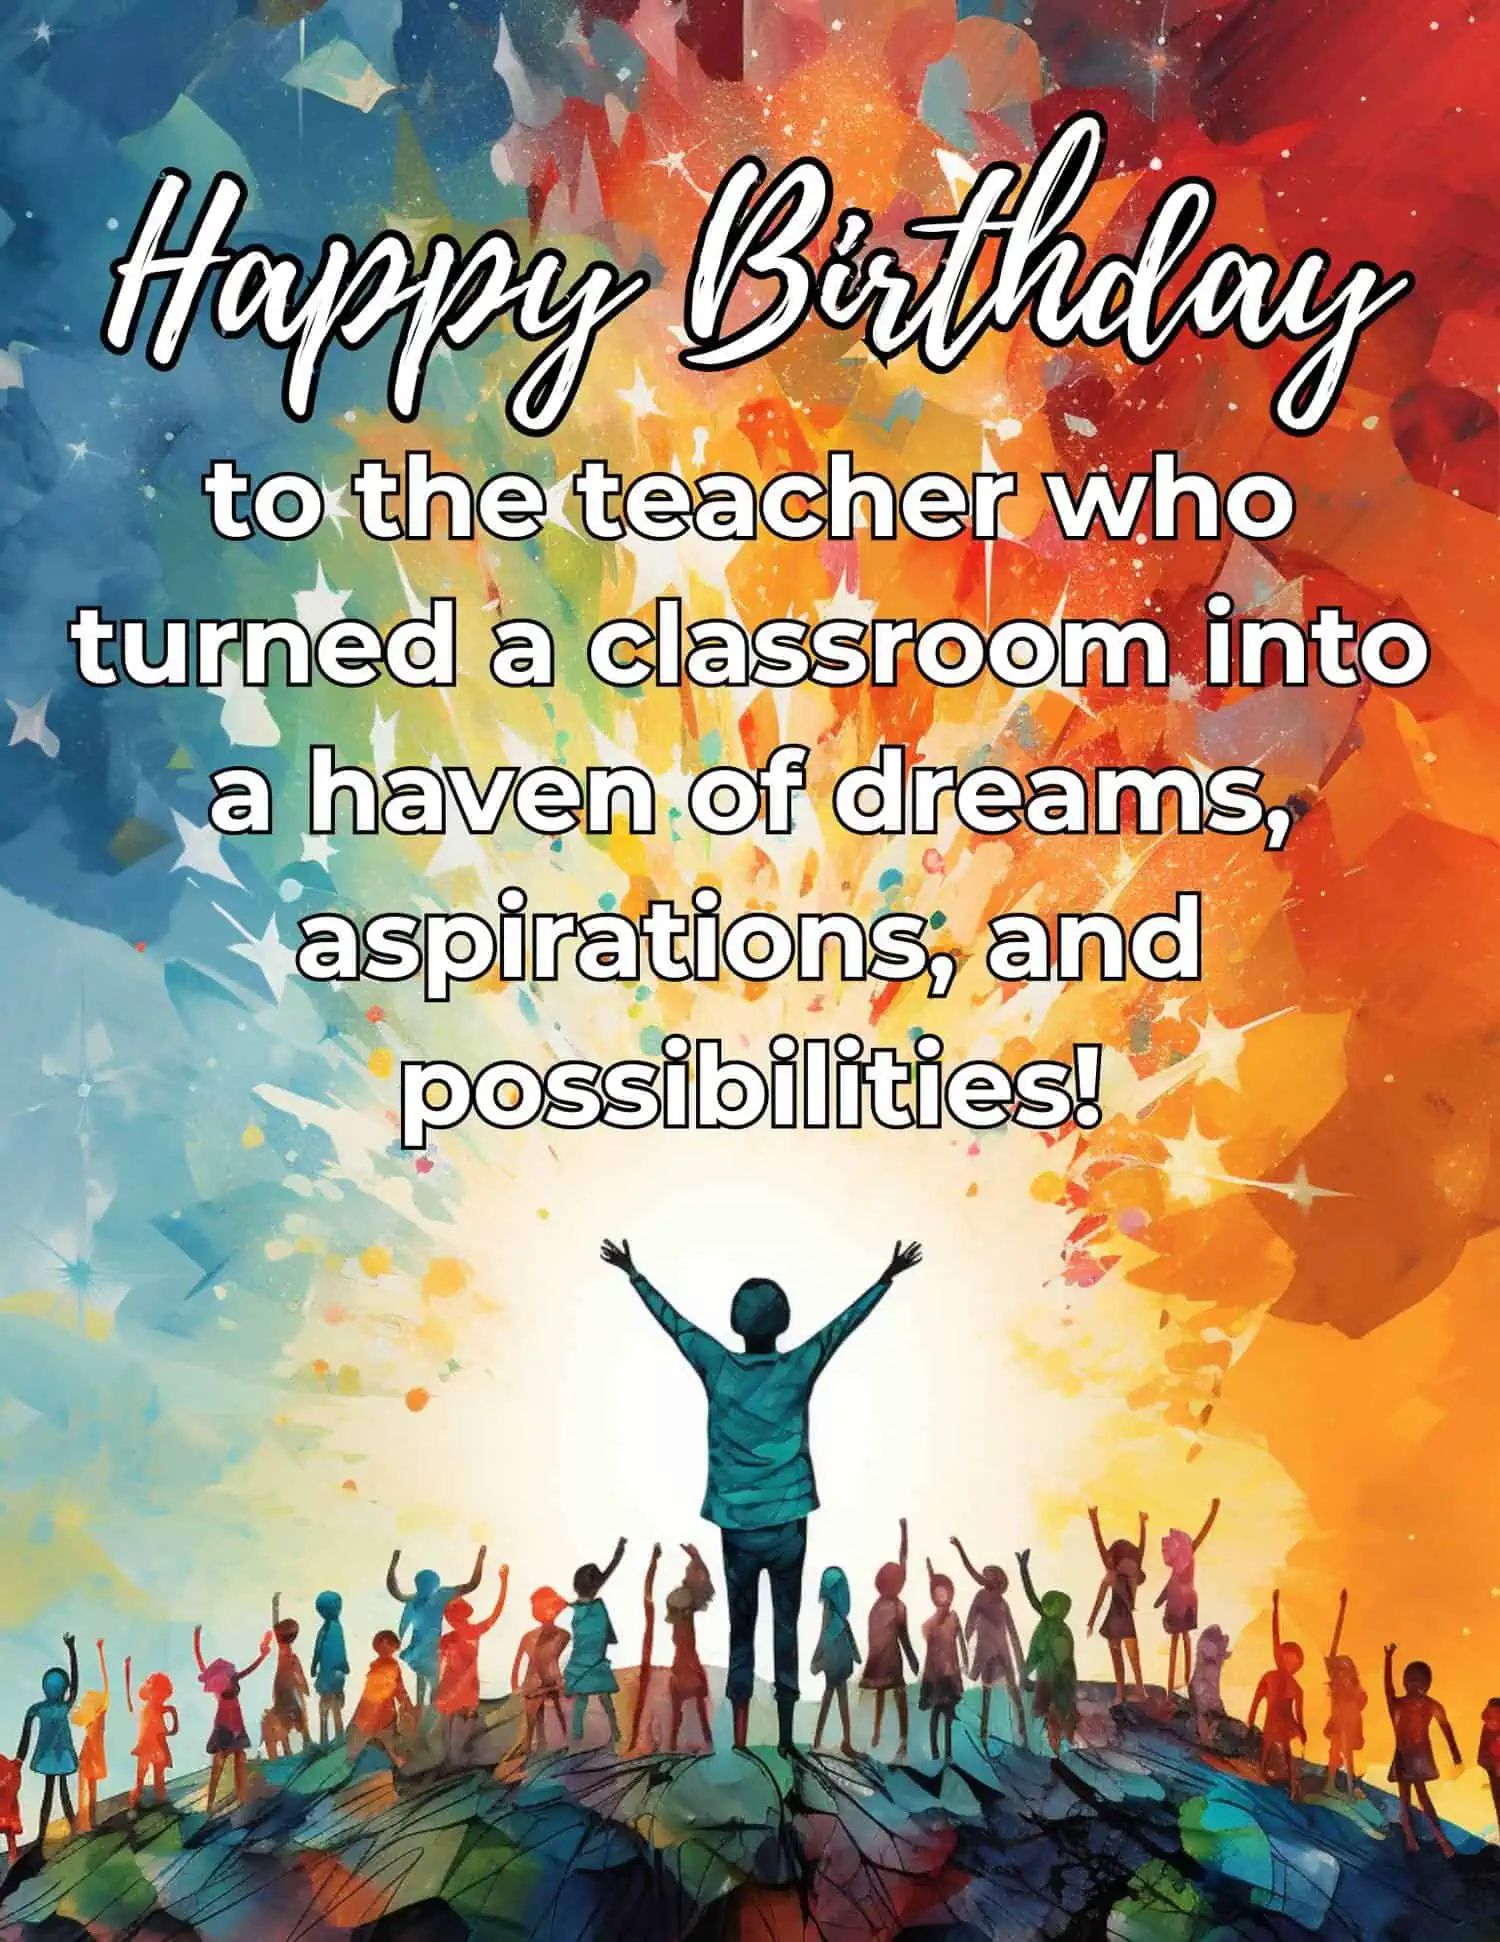 An assemblage of detailed and thoughtful birthday messages tailored exclusively for educators.